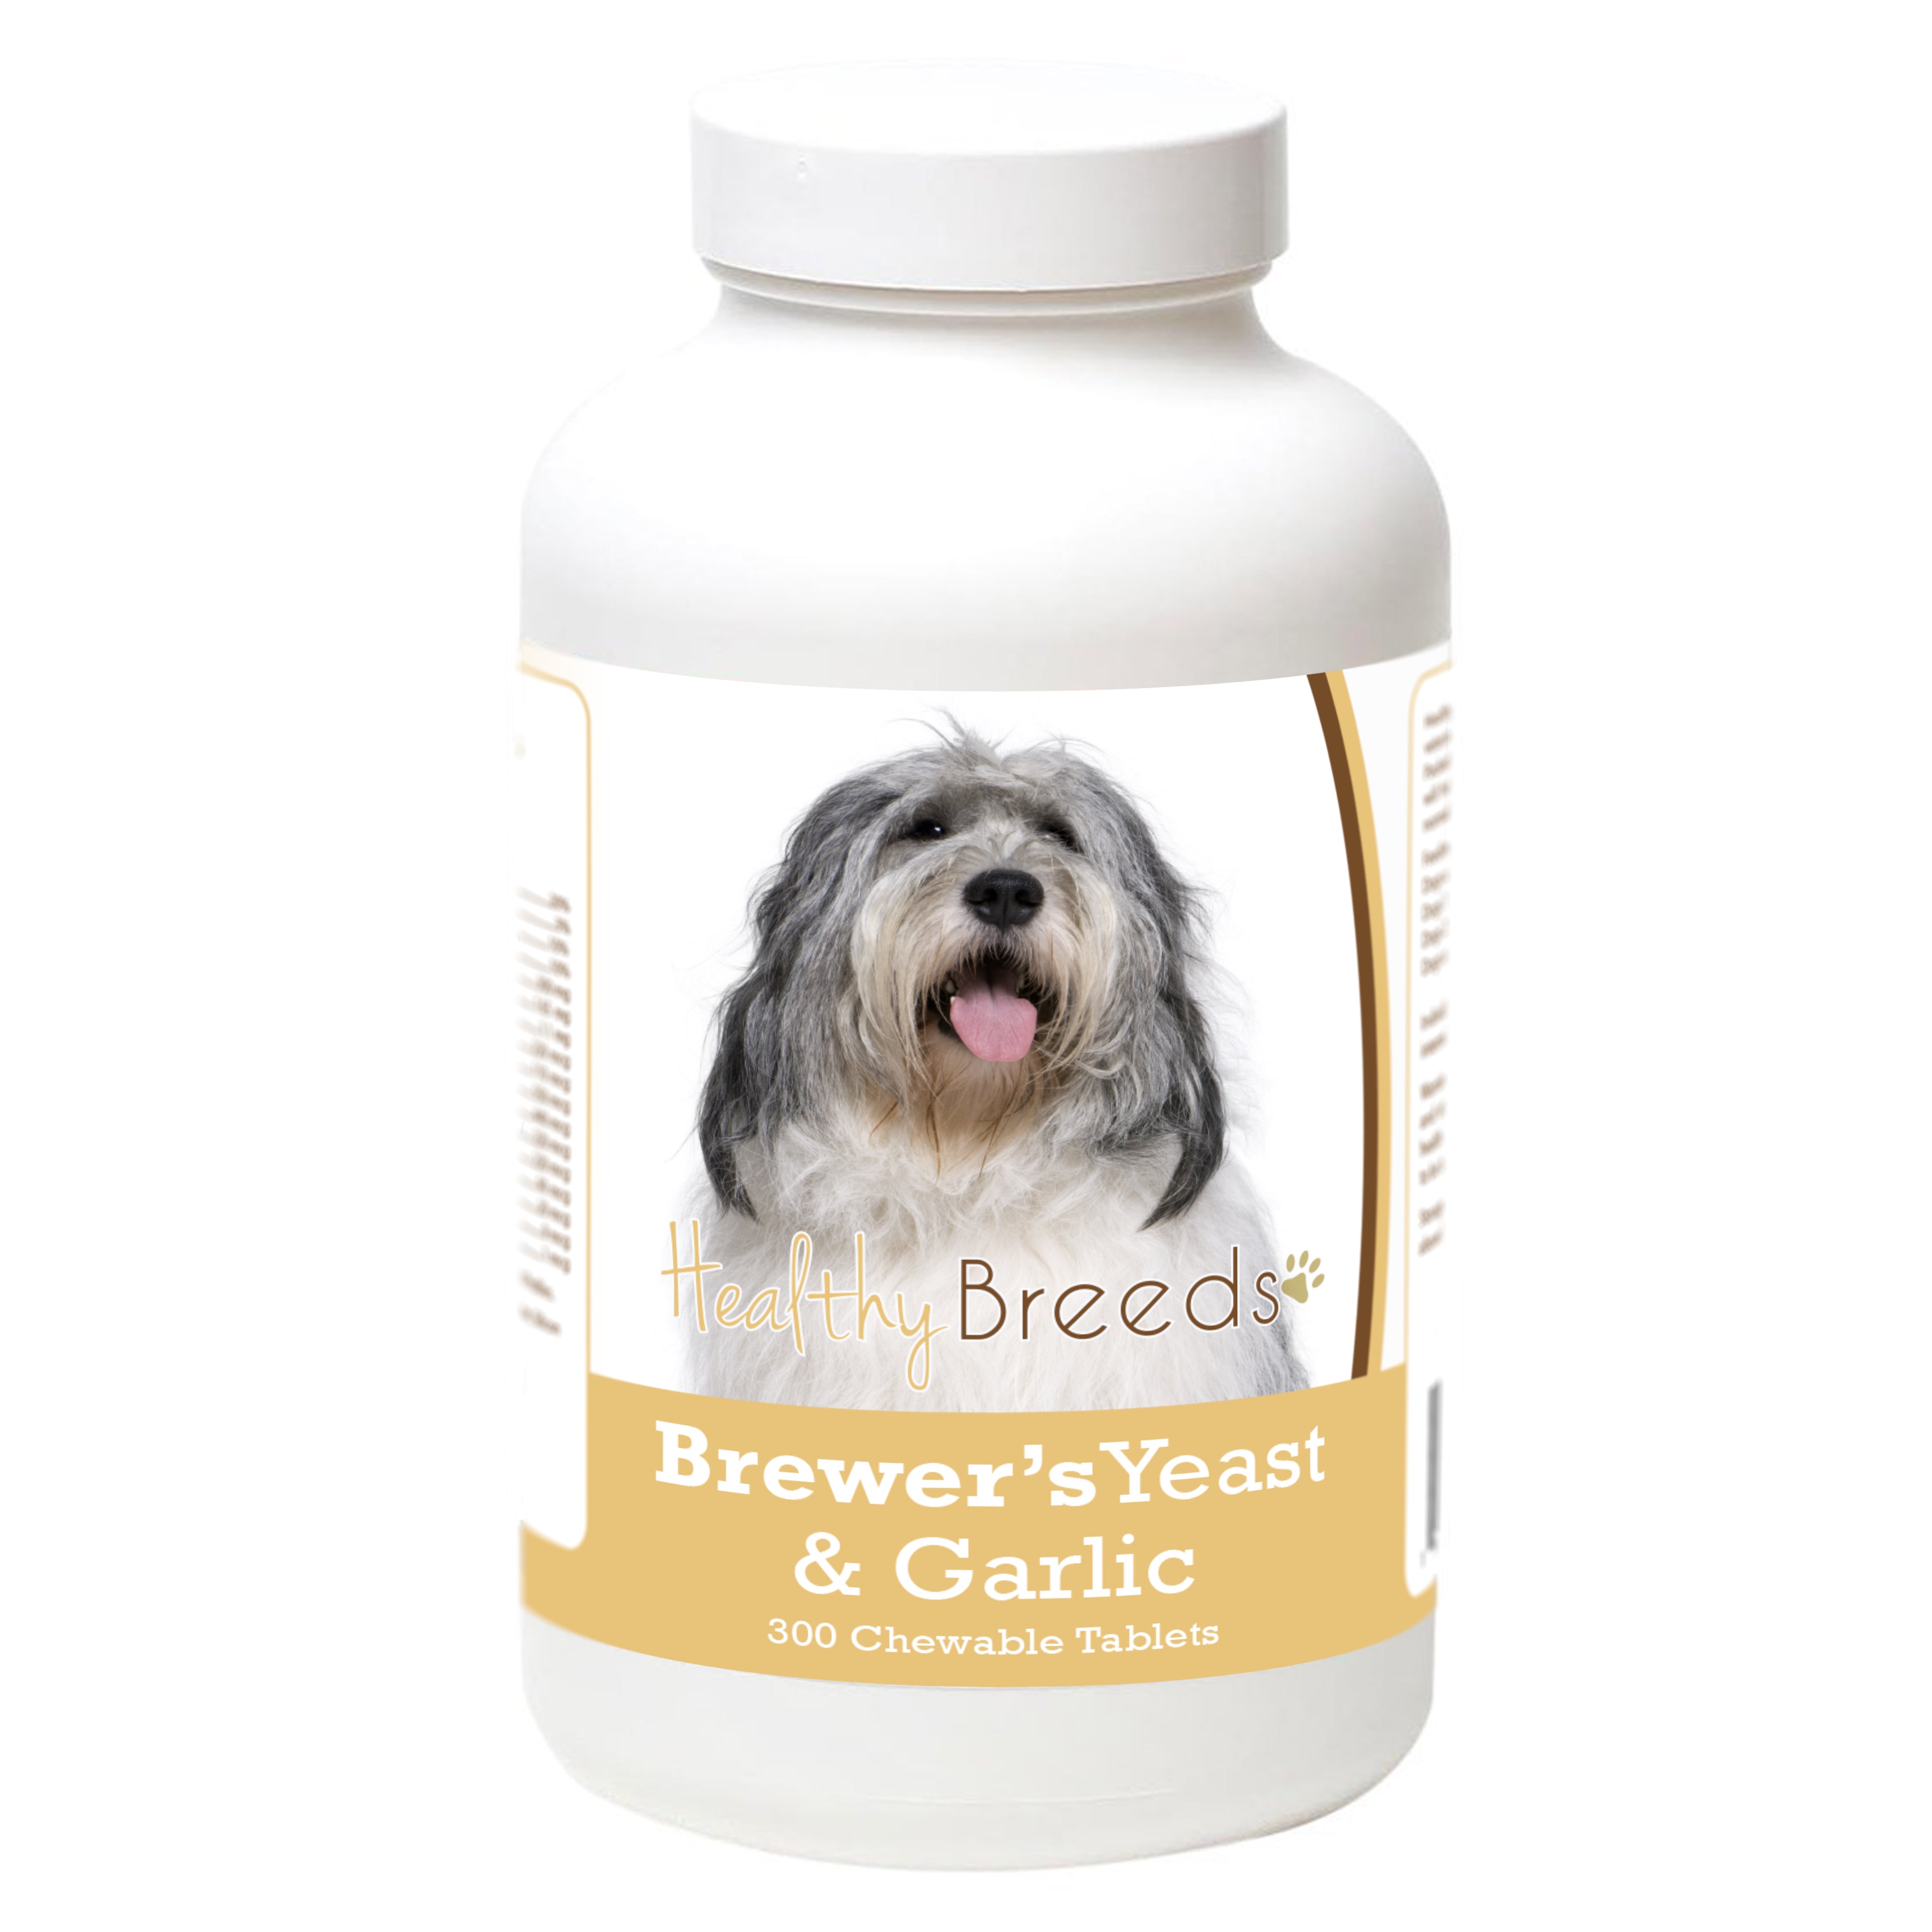 Polish Lowland Sheepdog Brewers Yeast Tablets 300 Count